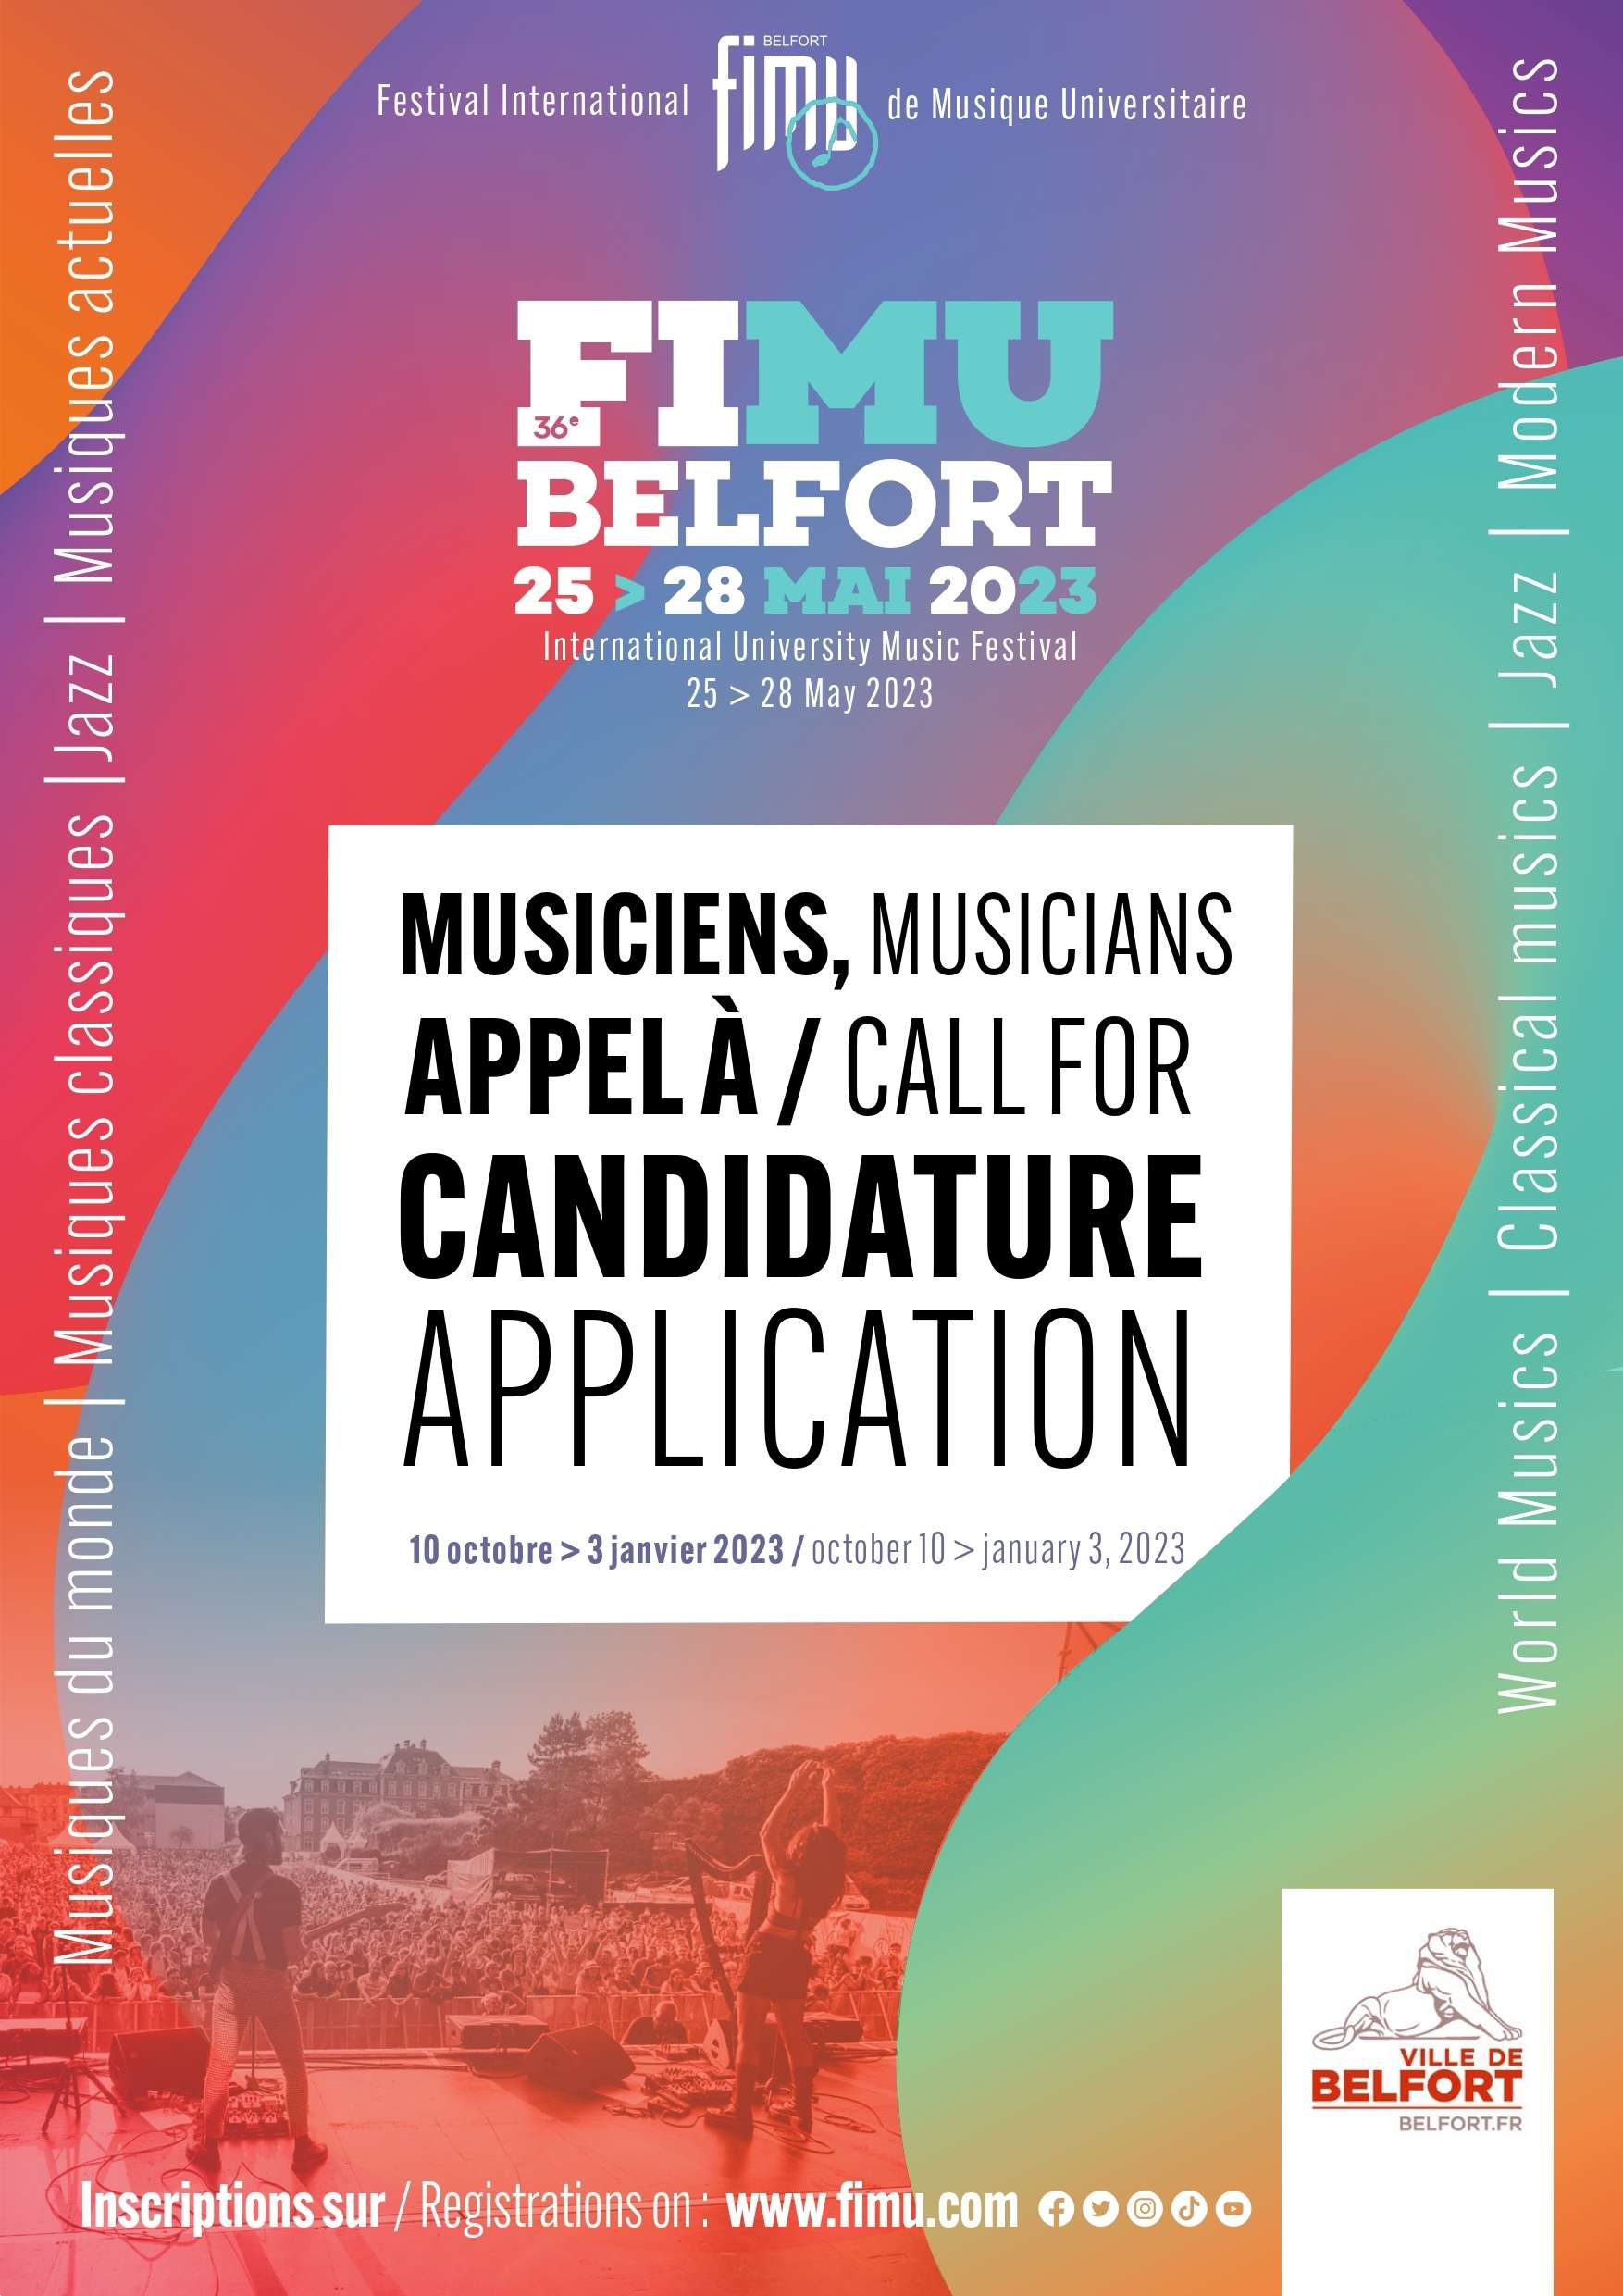 add-contact-files-url-affiche-appel-a-candidatures-2023-20221011-153803_page-0001.jpg